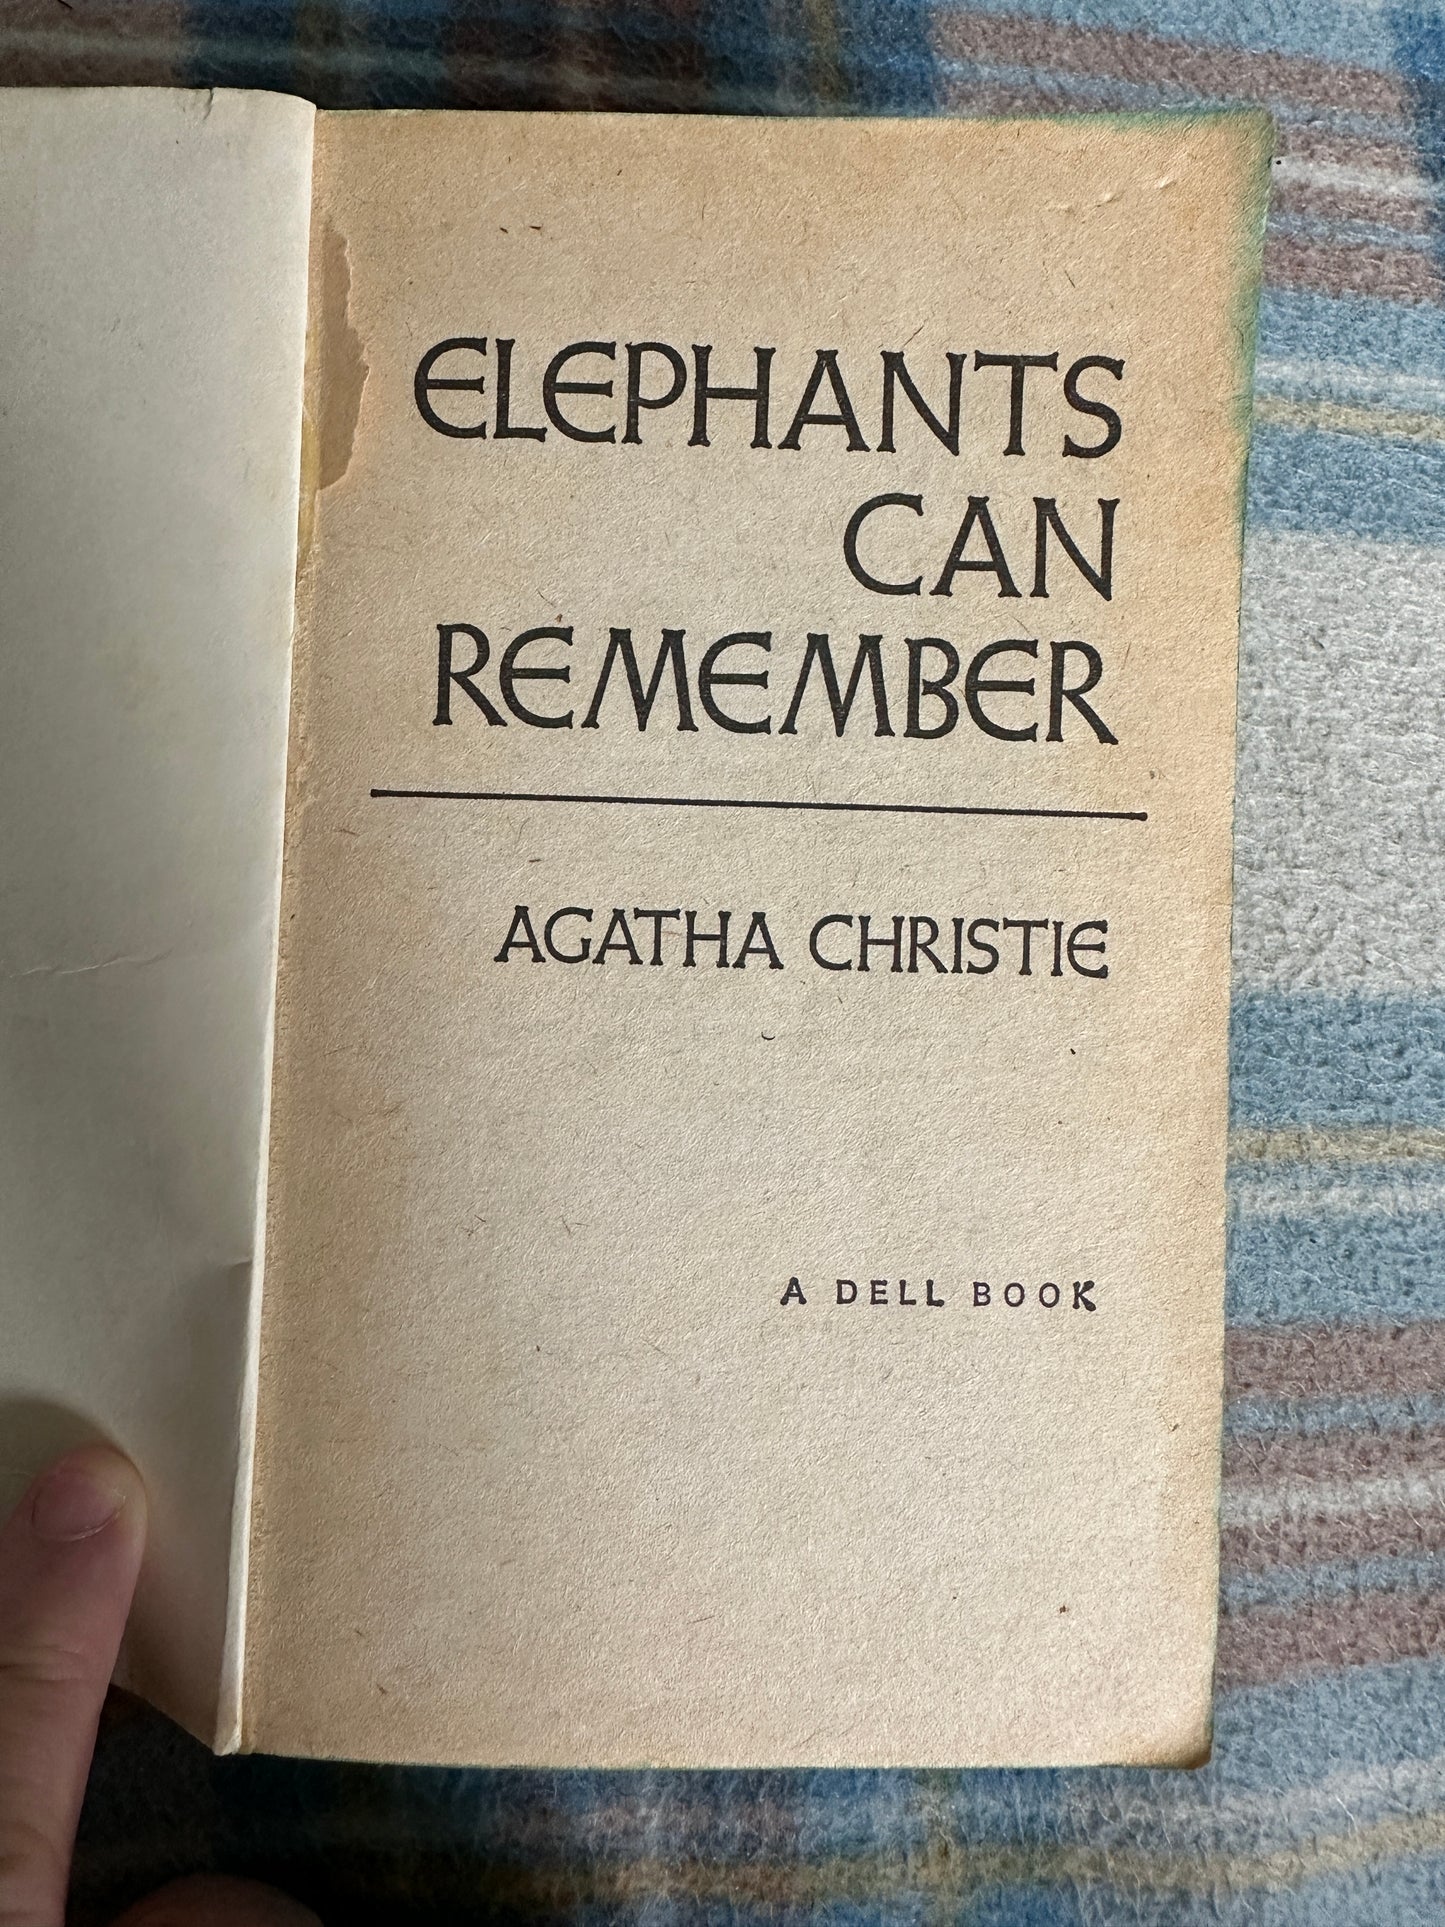 1977 Elephants Can Remember - Agatha Christie(Dell Books US)